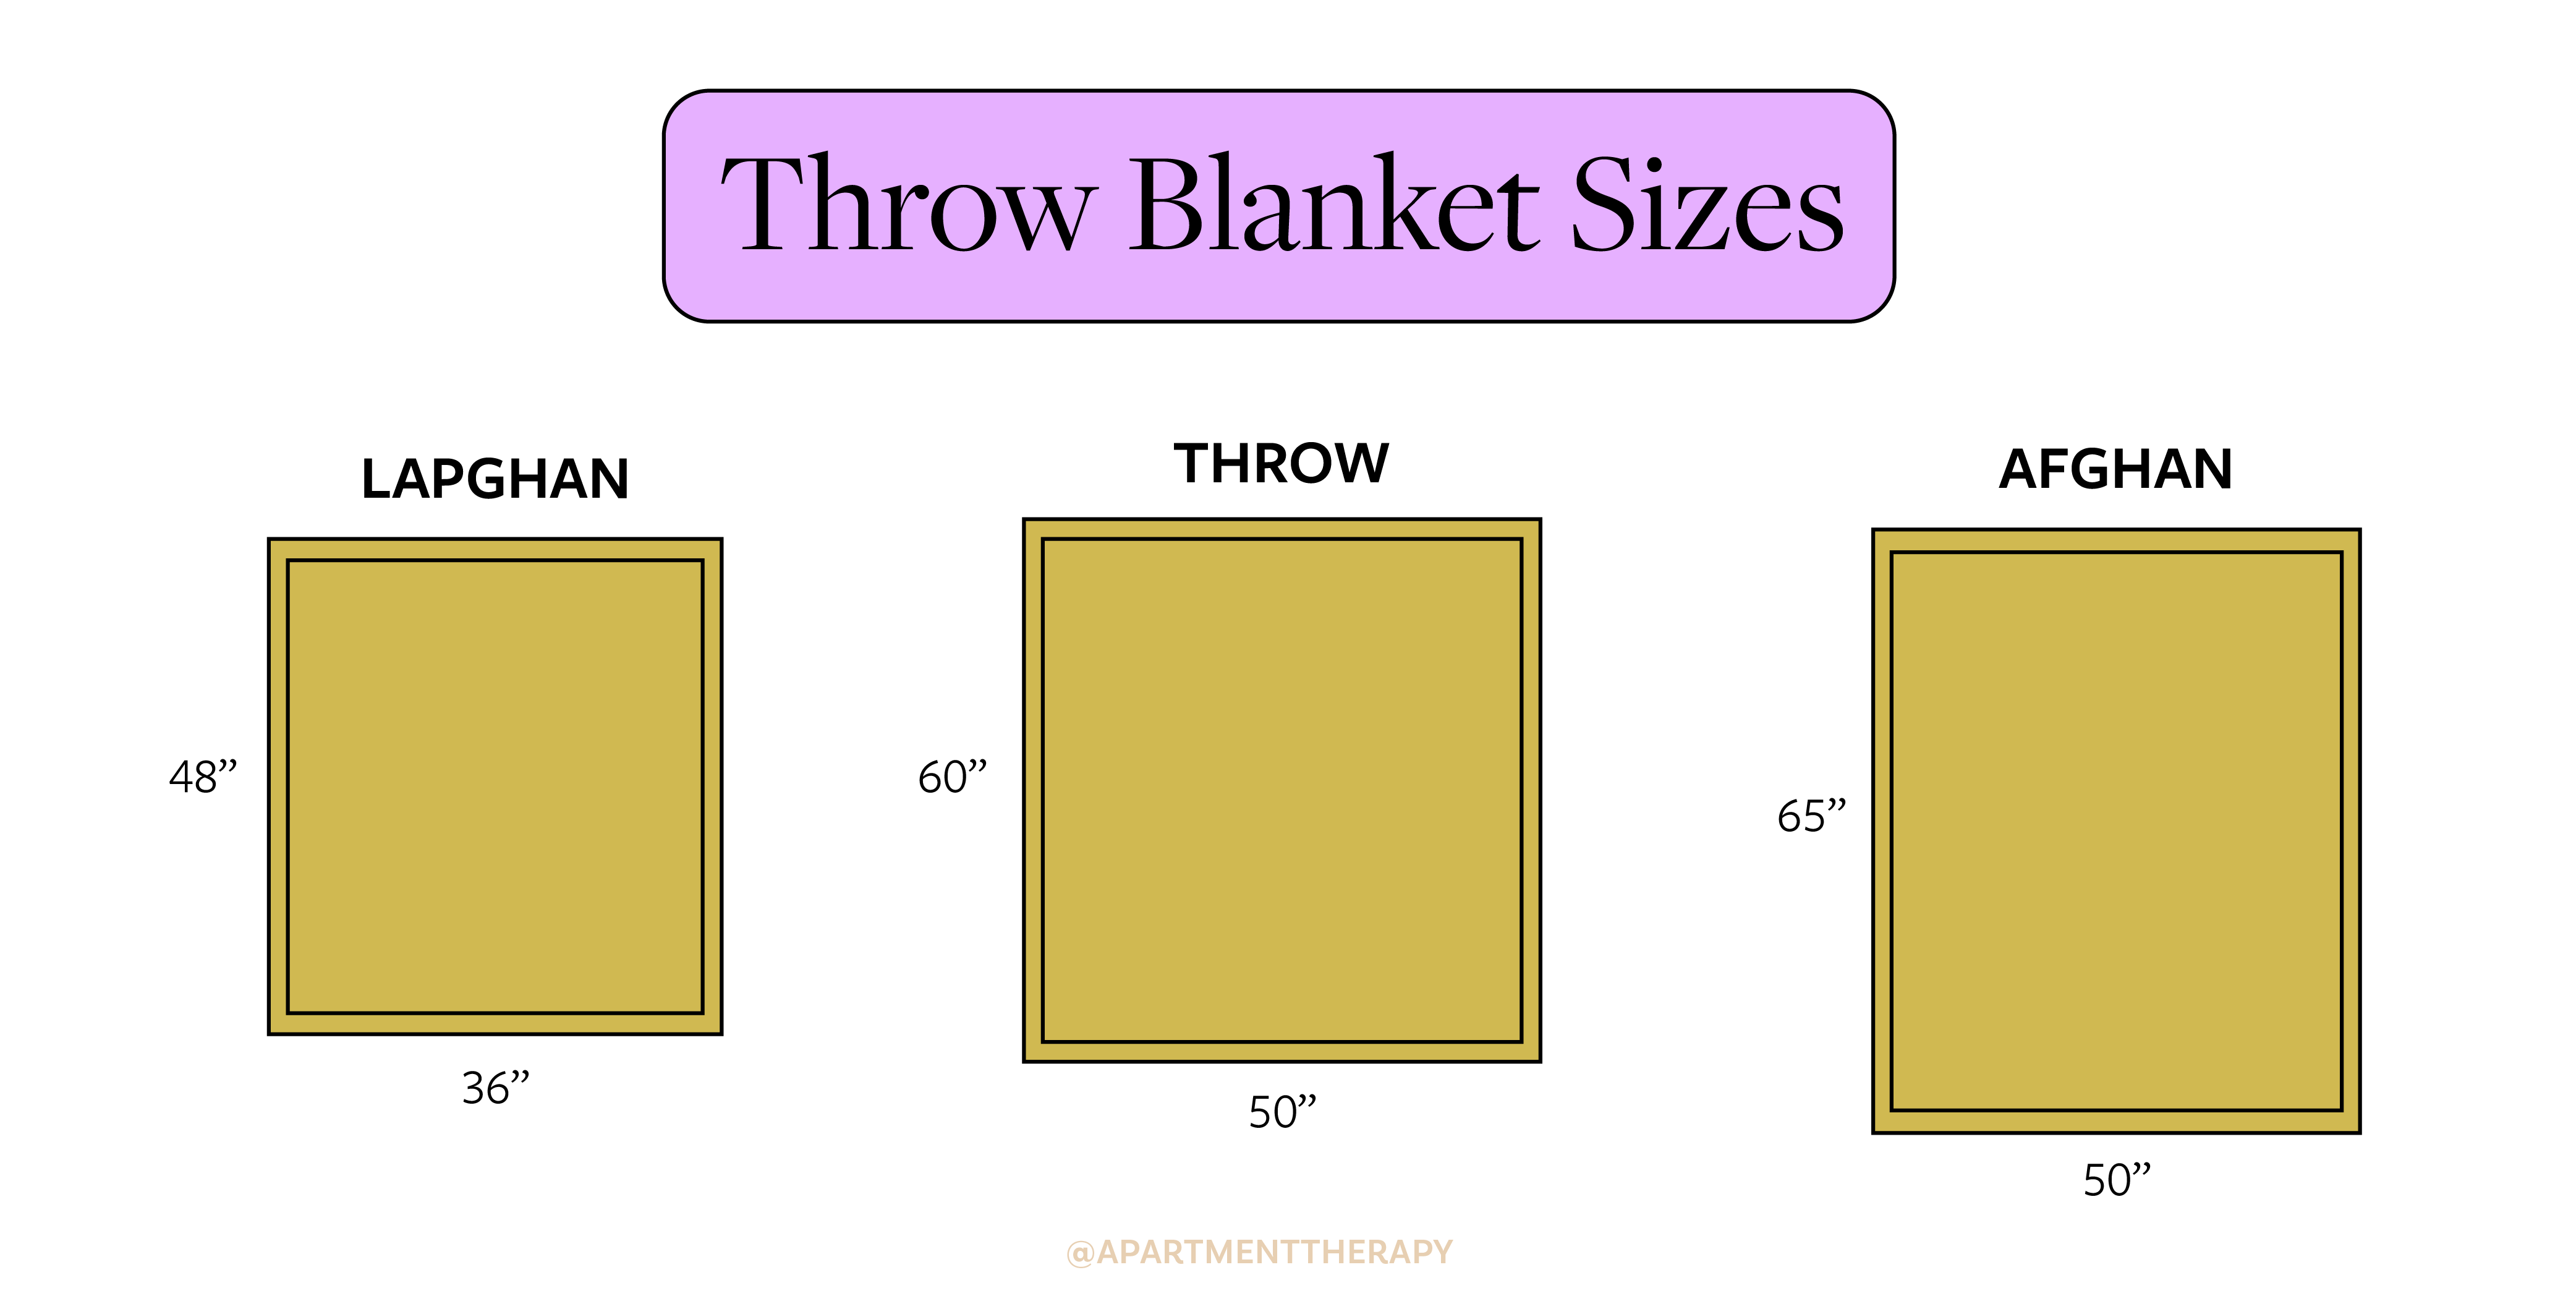 Bed Blanket and Throw Blanket Size Guide - Boll & Branch